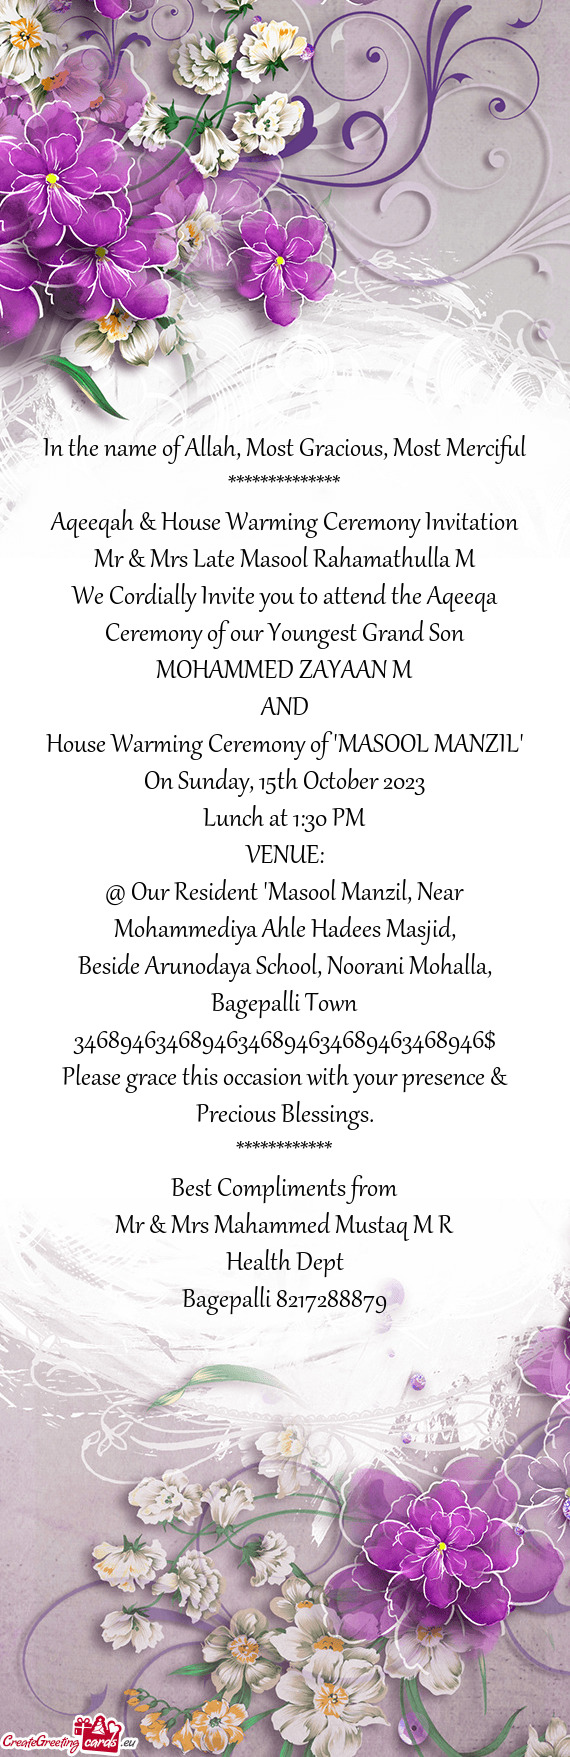 We Cordially Invite you to attend the Aqeeqa Ceremony of our Youngest Grand Son